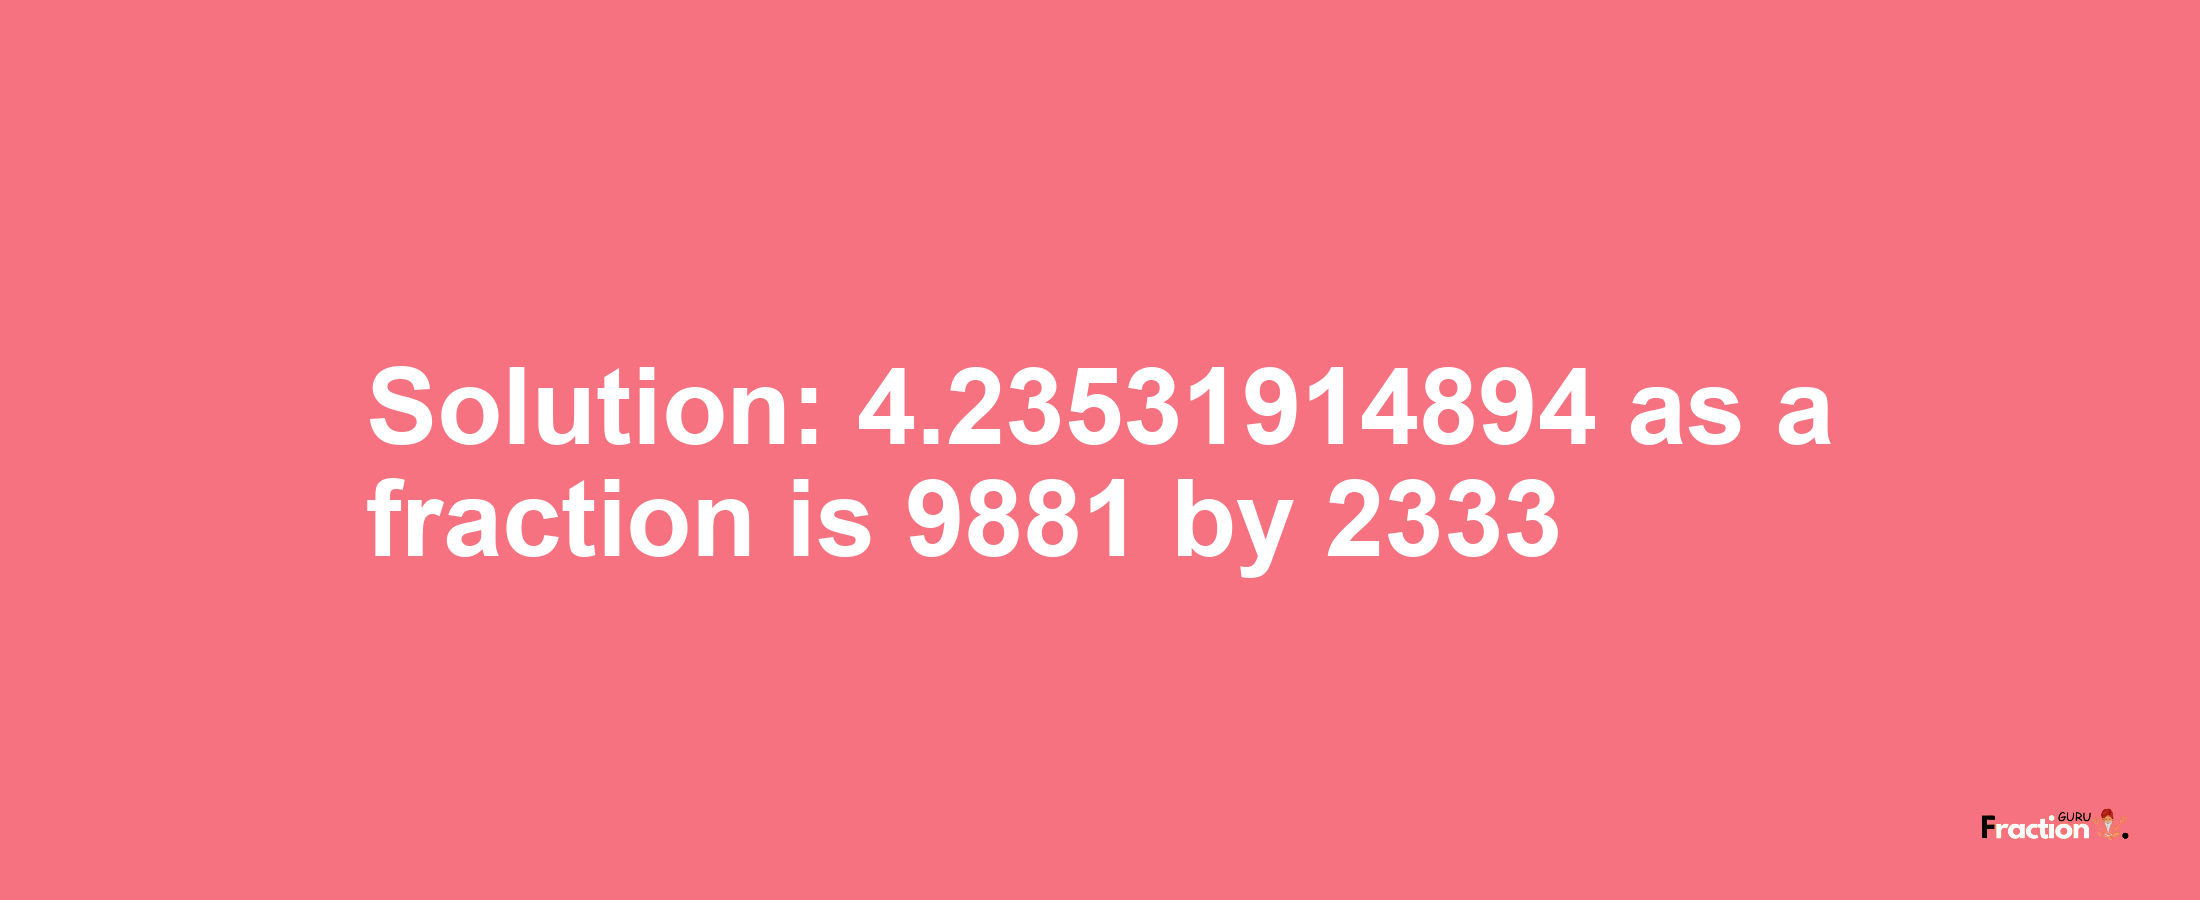 Solution:4.23531914894 as a fraction is 9881/2333